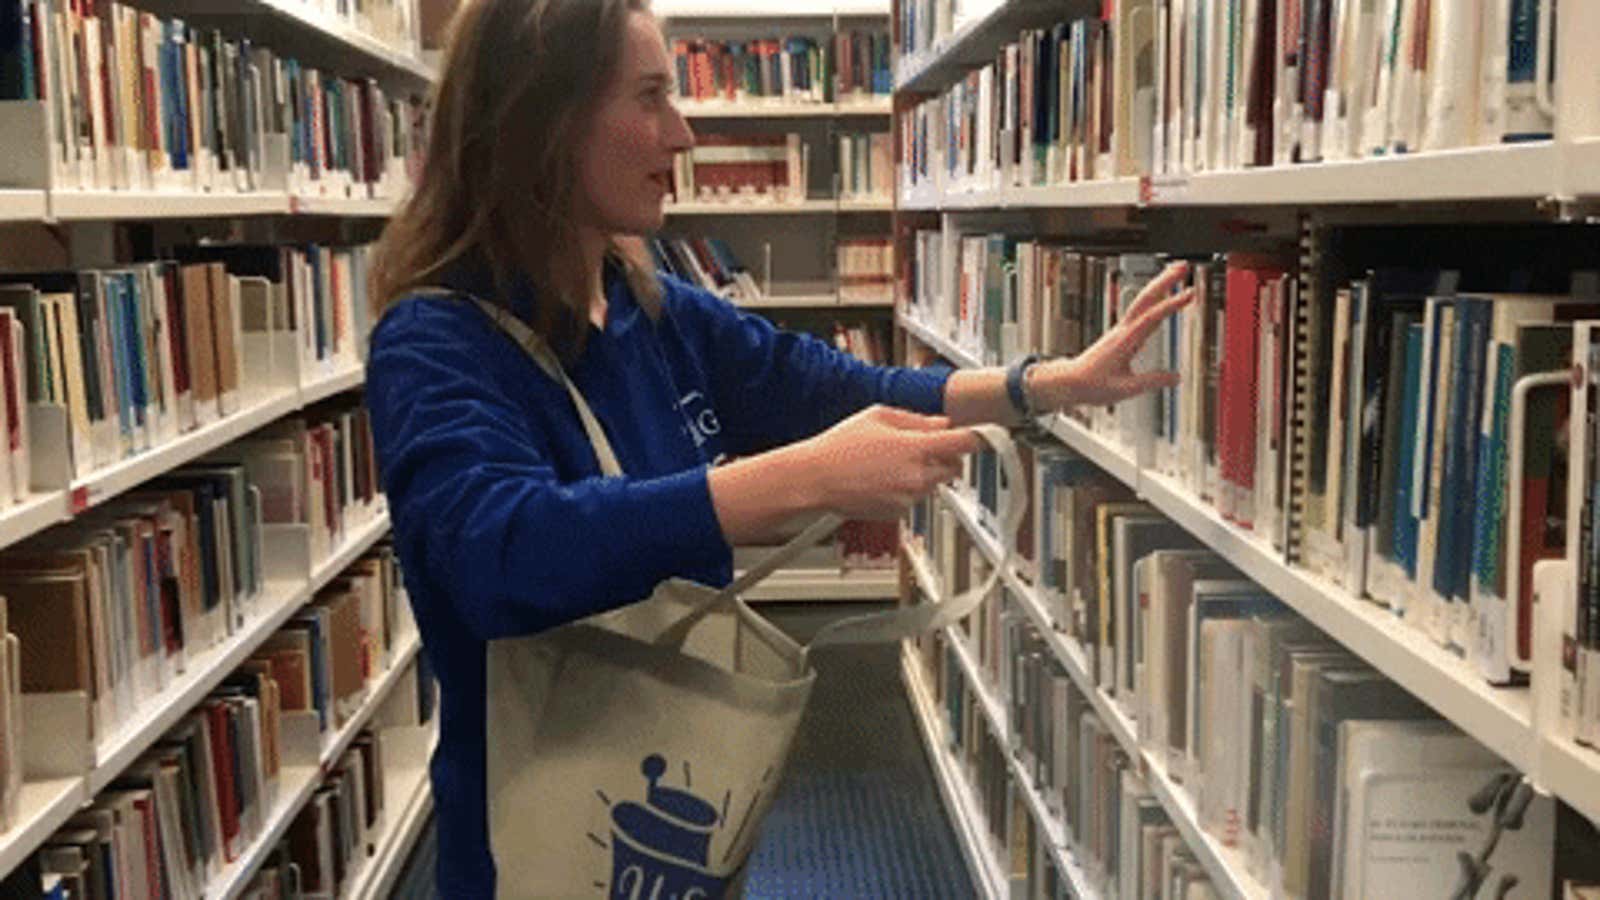 A woman stuffs books into her tote bag